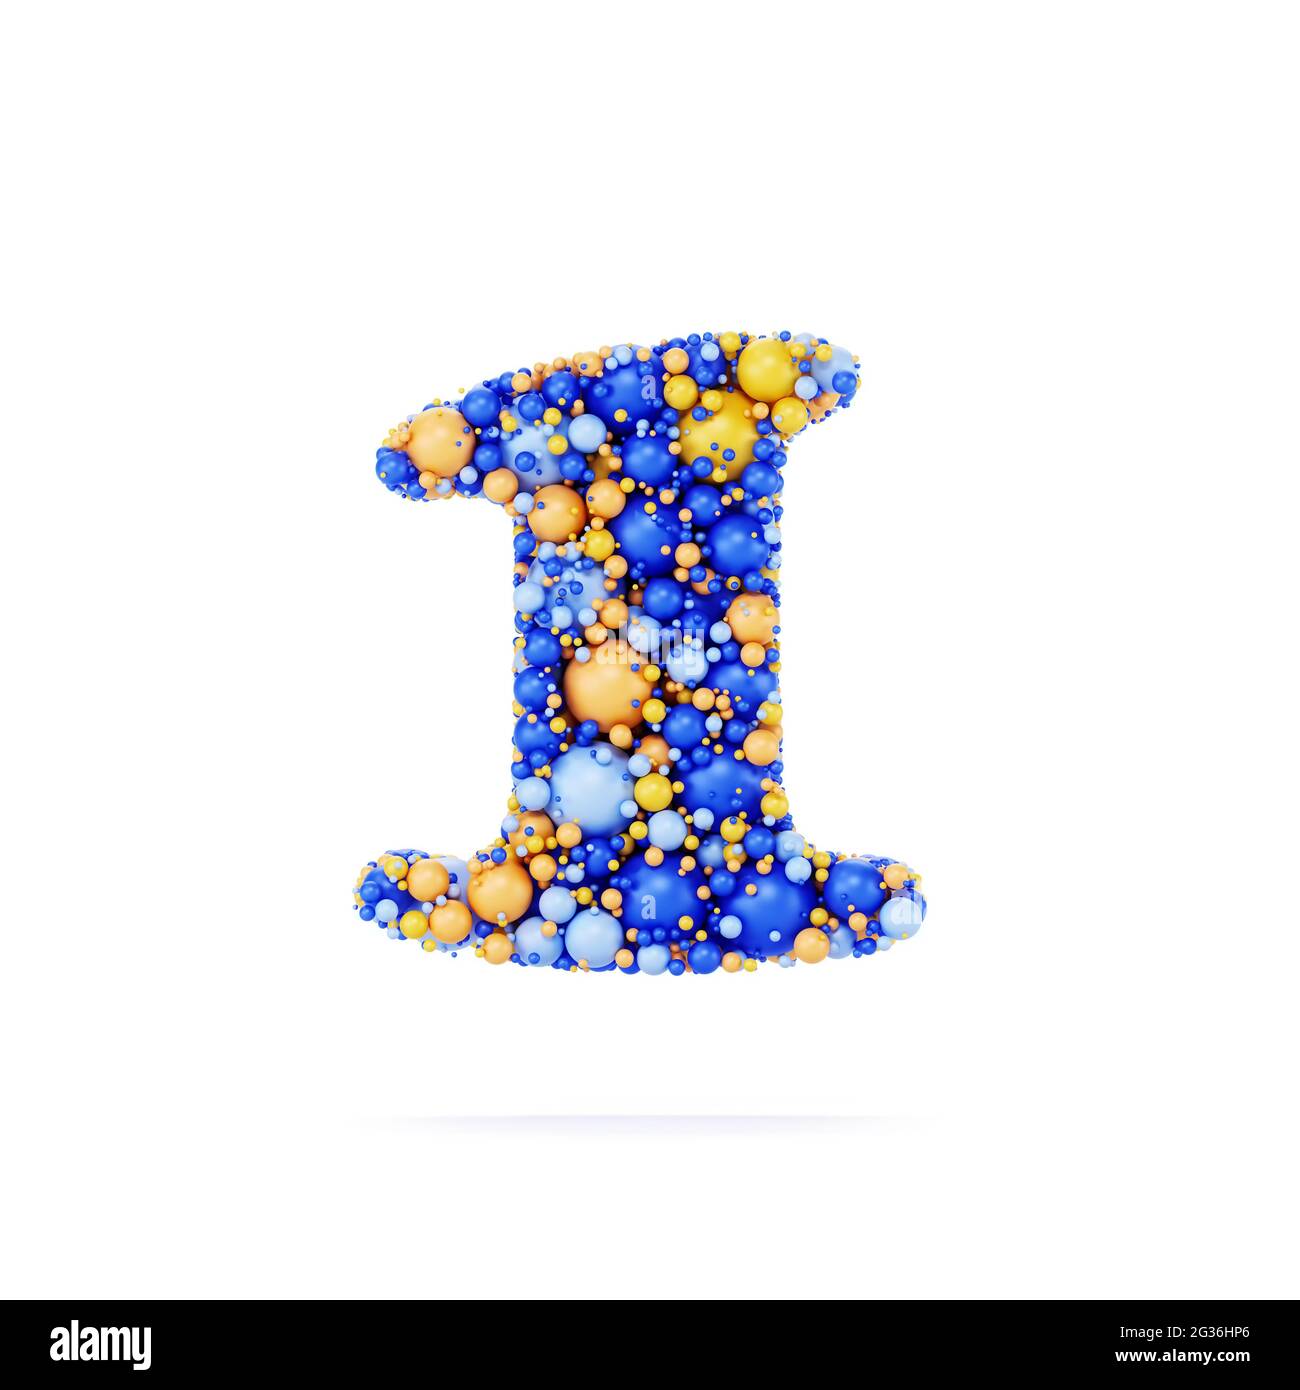 1 one number digit with colored shiny balls. Realistic 3d rendering illustration. Isolated on white background with shadow cast Stock Photo